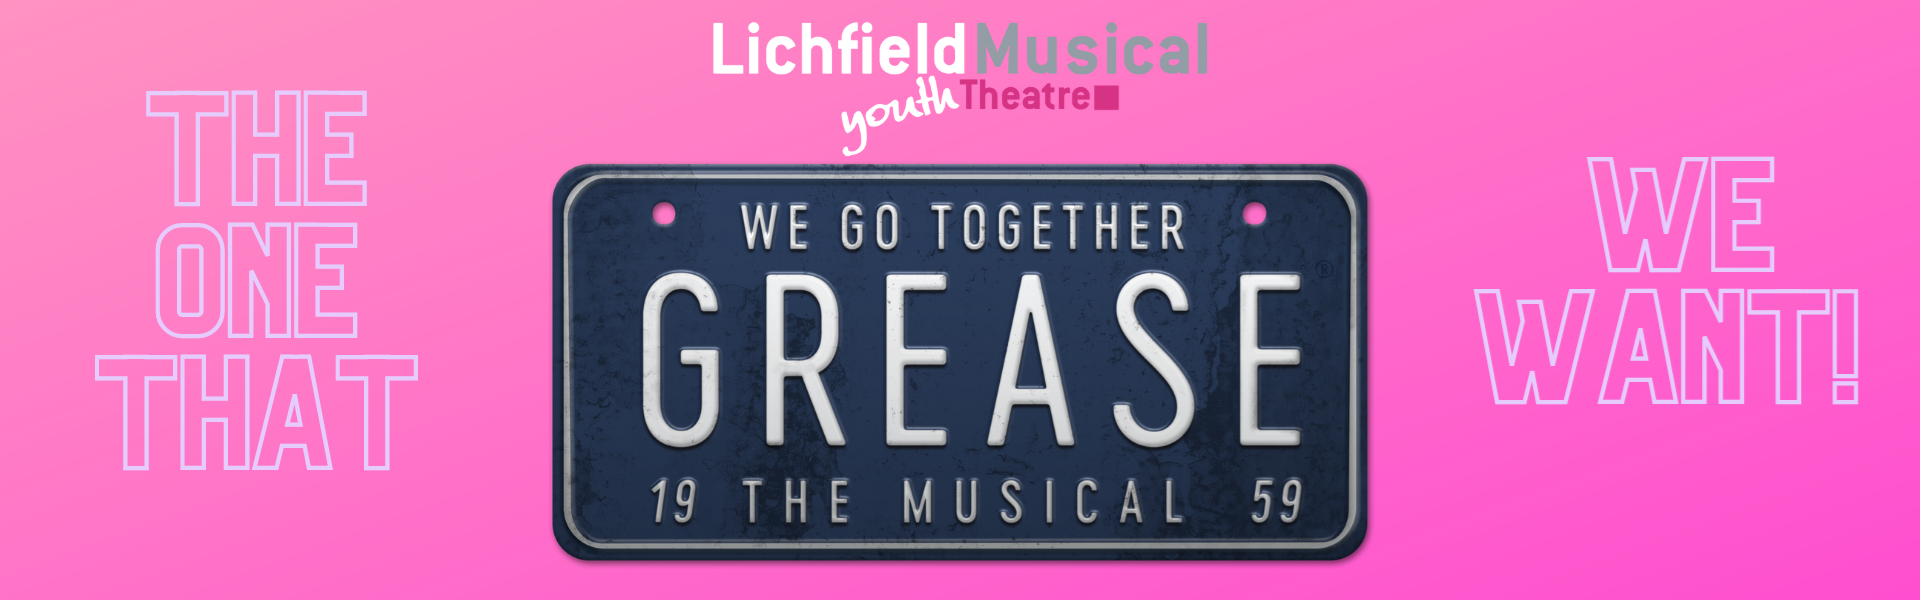 Grease - presented by Lichfield Musical Youth Theatre